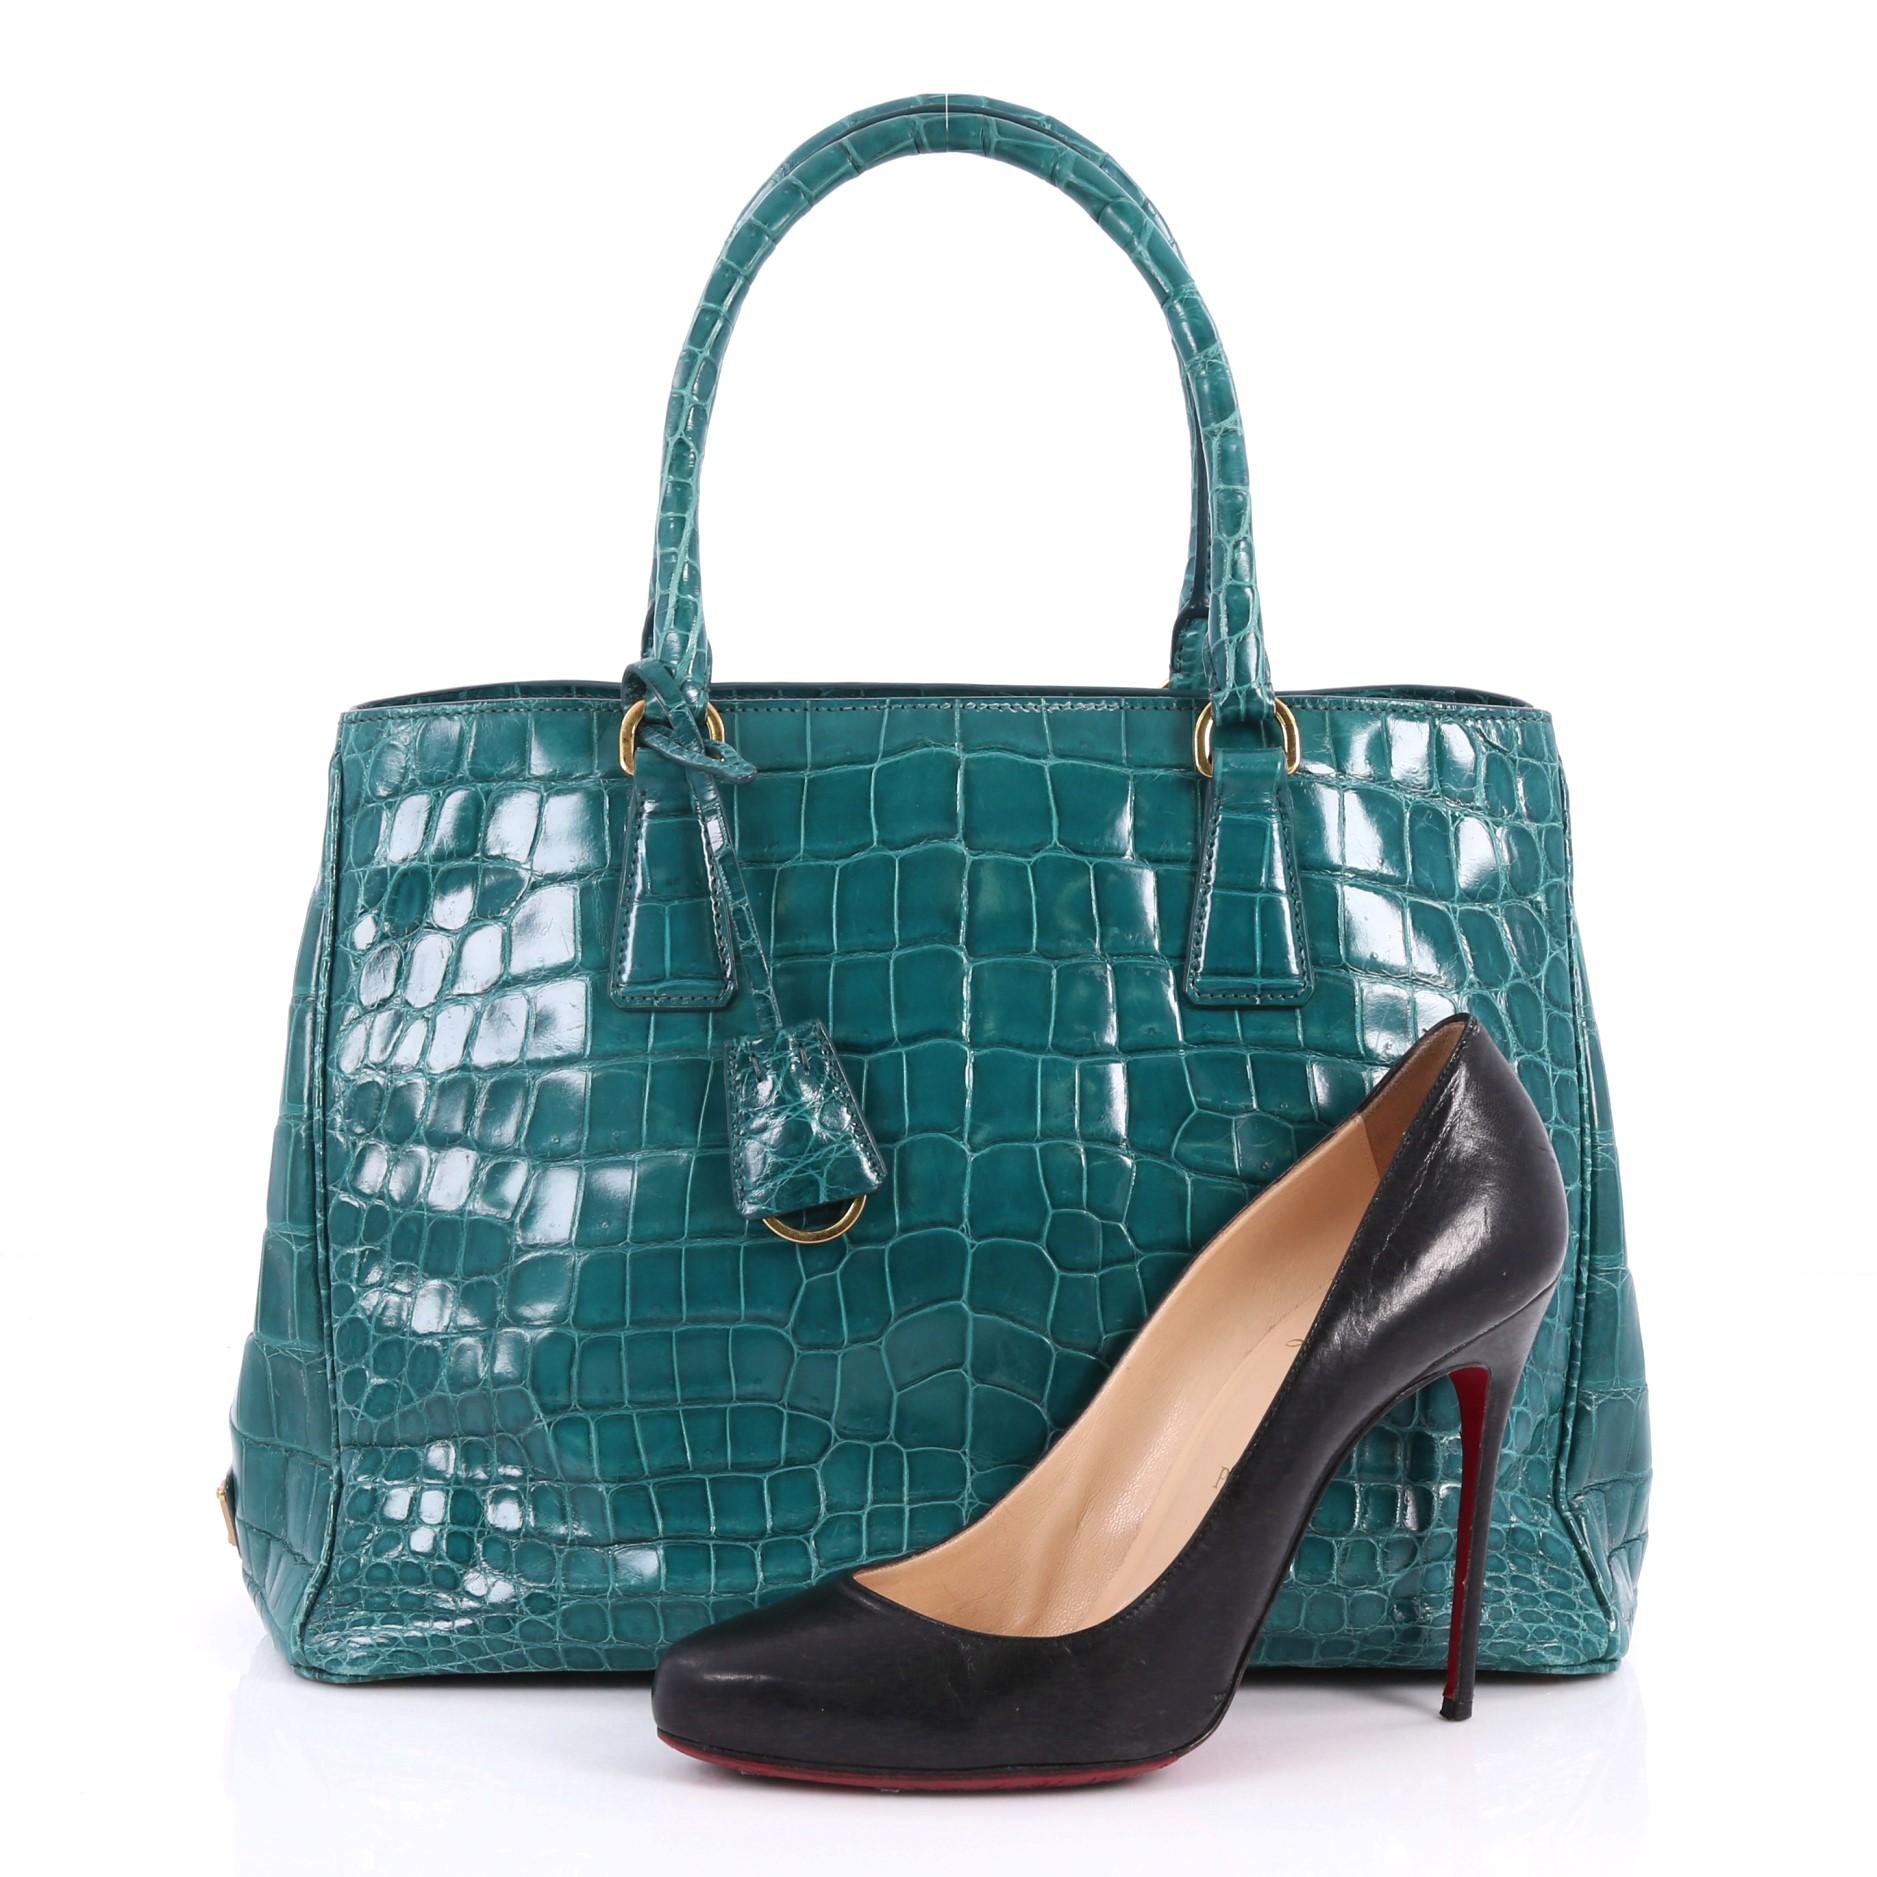 This authentic Prada Gardener's Tote Crocodile Medium is elegant in its simplicity and structure. Crafted from genuine green crocodile, this tote features dual-rolled leather handles, signature Prada logo on the side, protective base studs, and